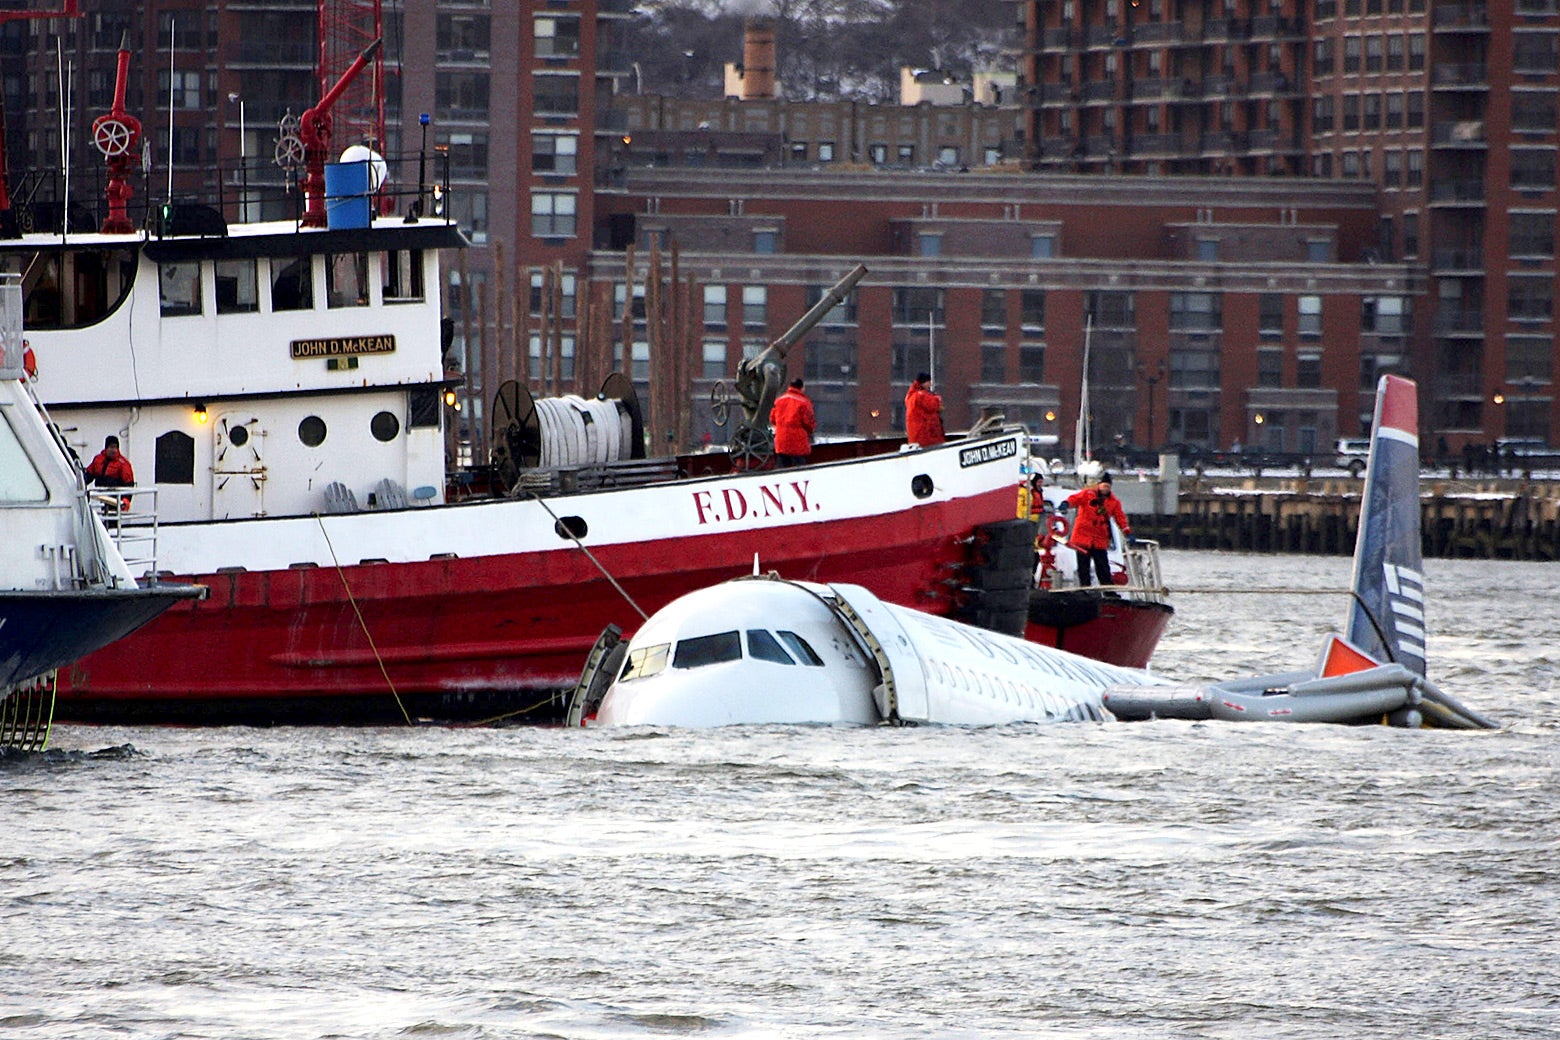 A New York City Fire Department boat floats next to partially submerged plane in the Hudson River.